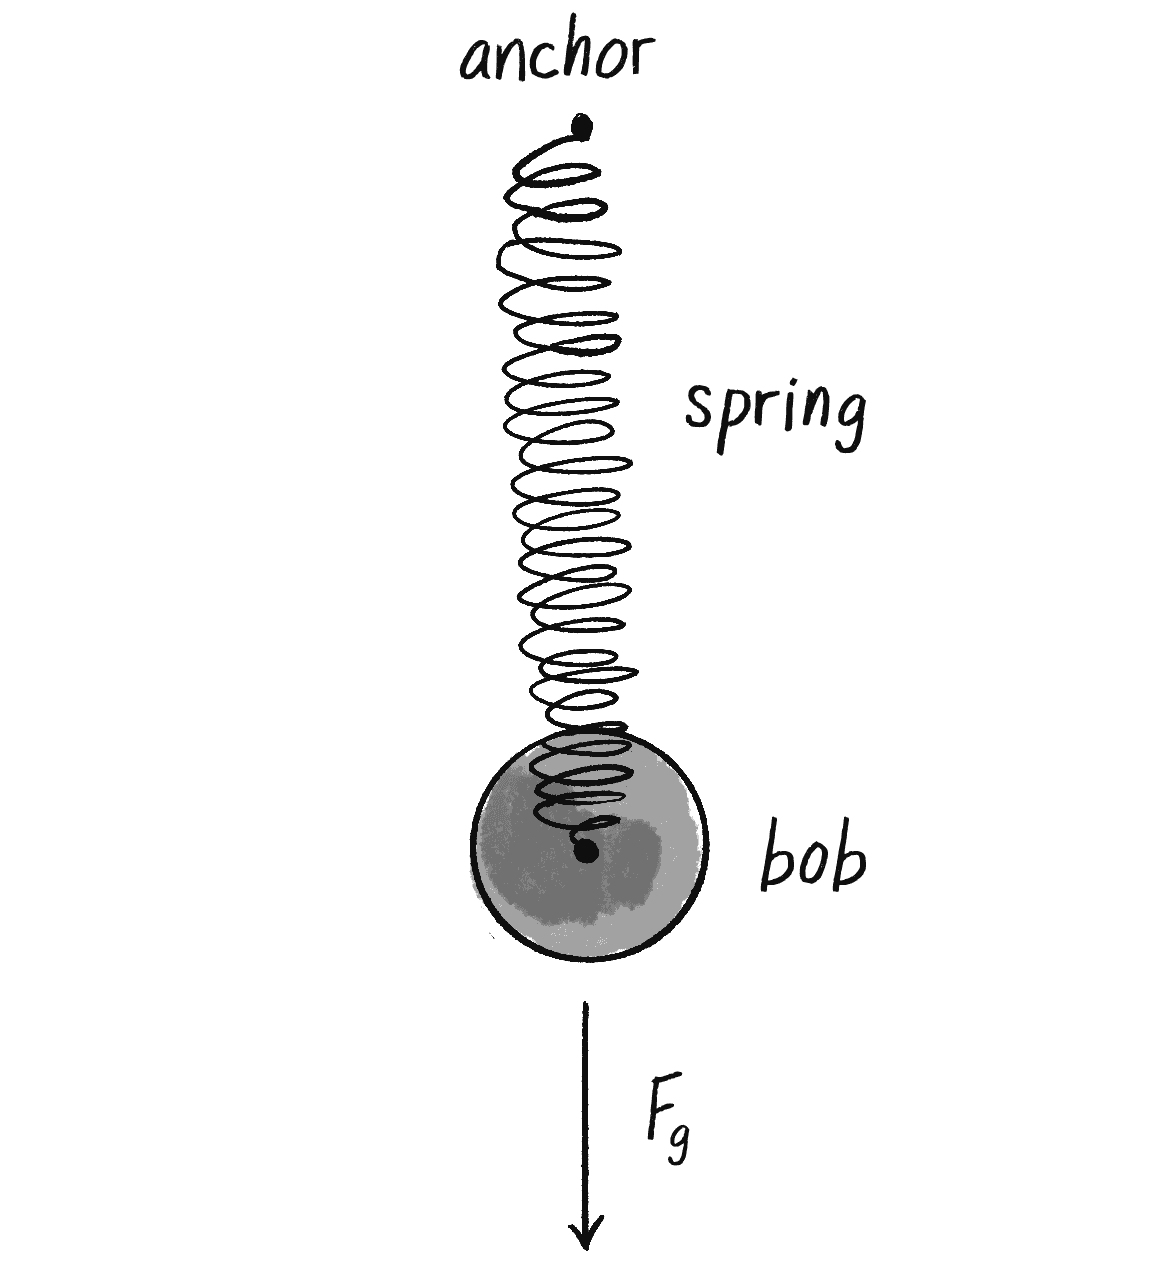 Figure 3.14: A spring with an anchor and bob